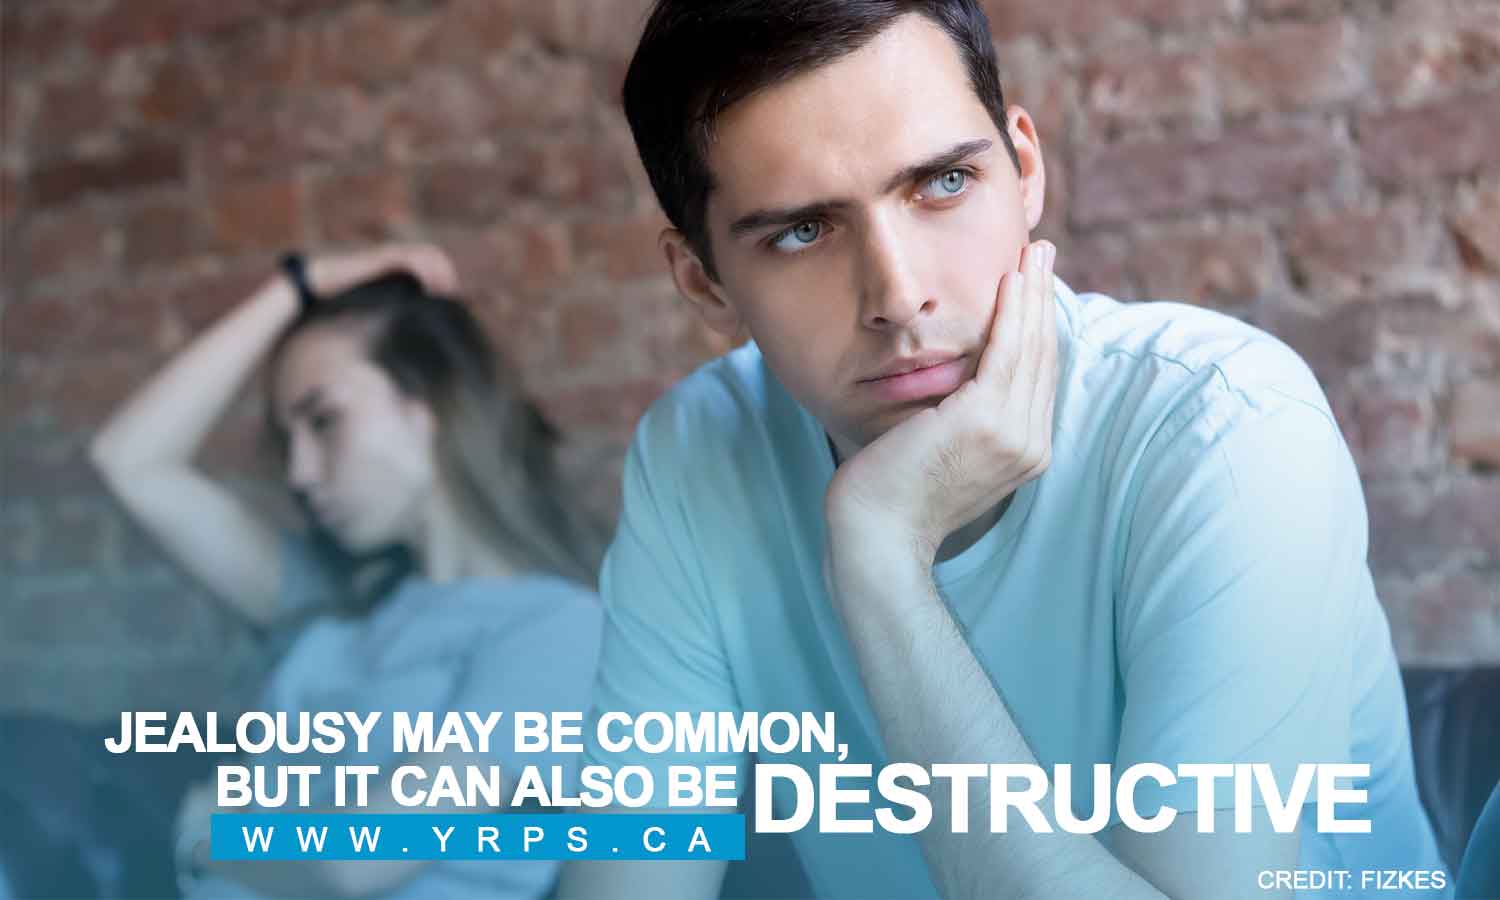 Jealousy may be common, but it can also be destructive